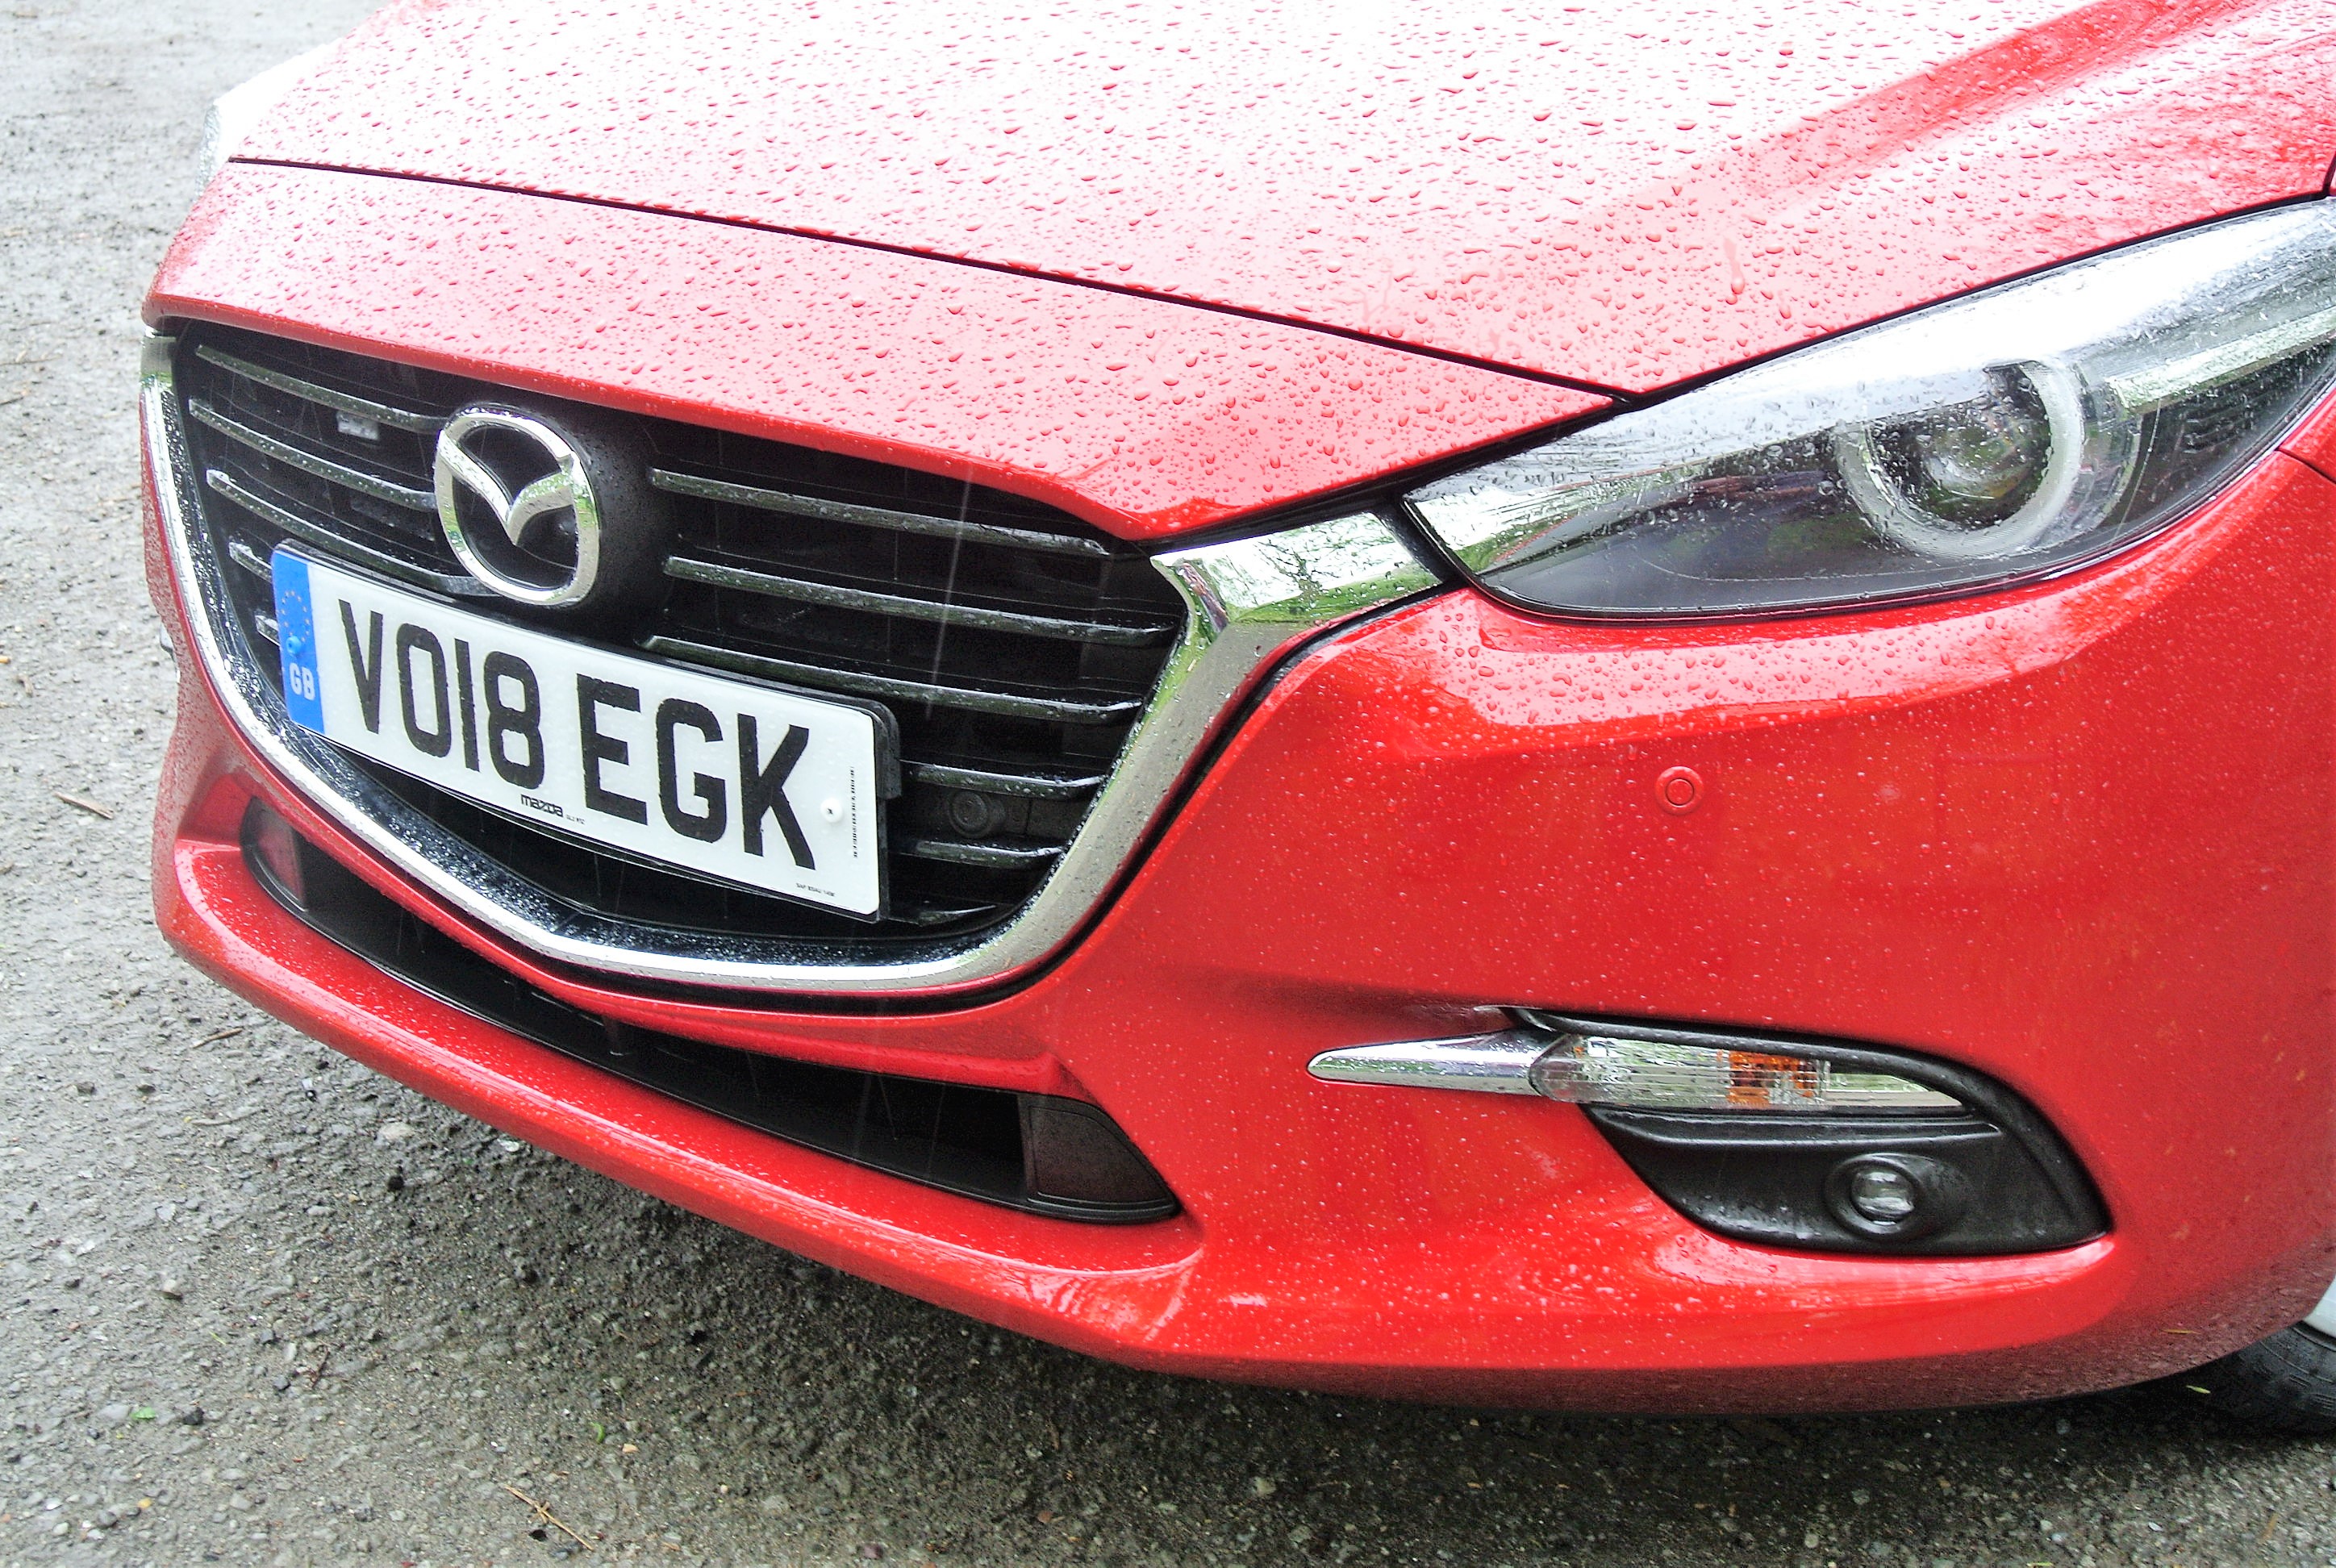 Mazda takes an alternative swipe at technology with its compact 3